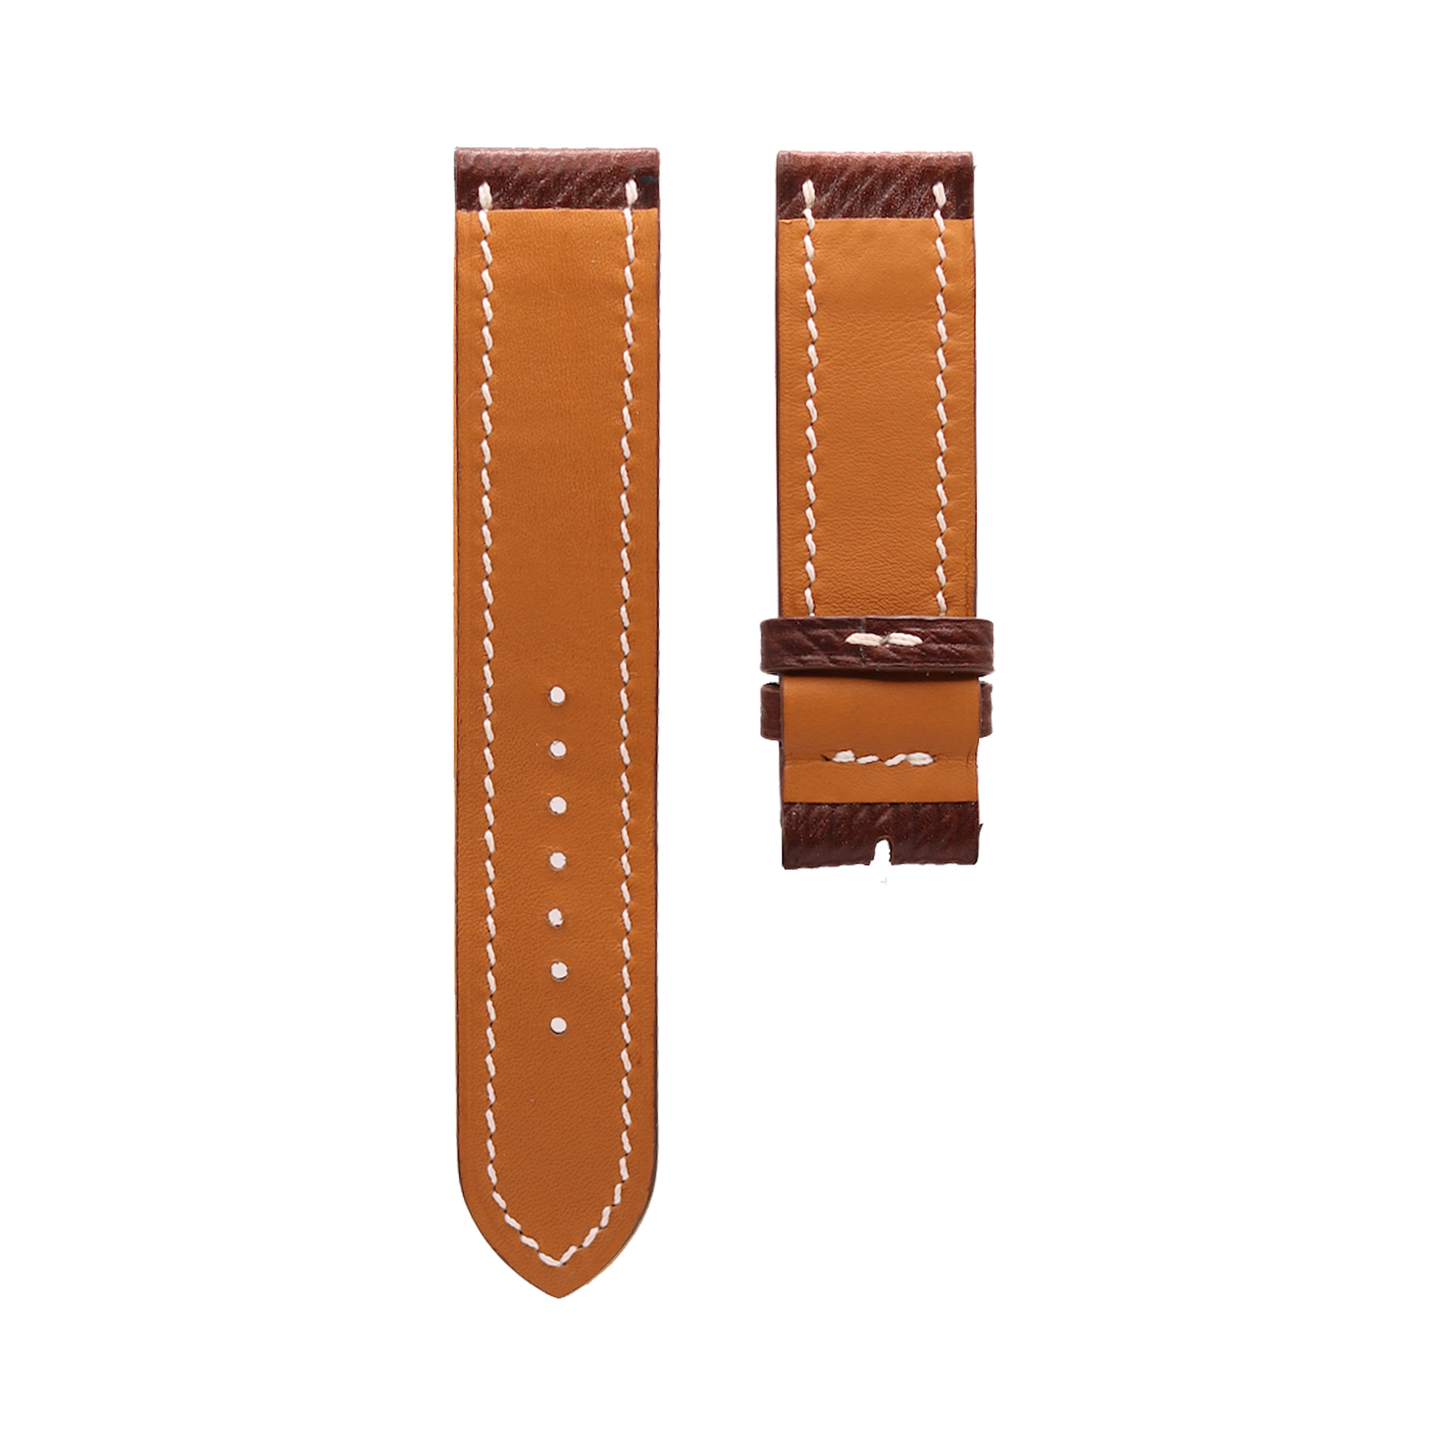 Brown Russian Calf Slim Leather Apple Watch Strap